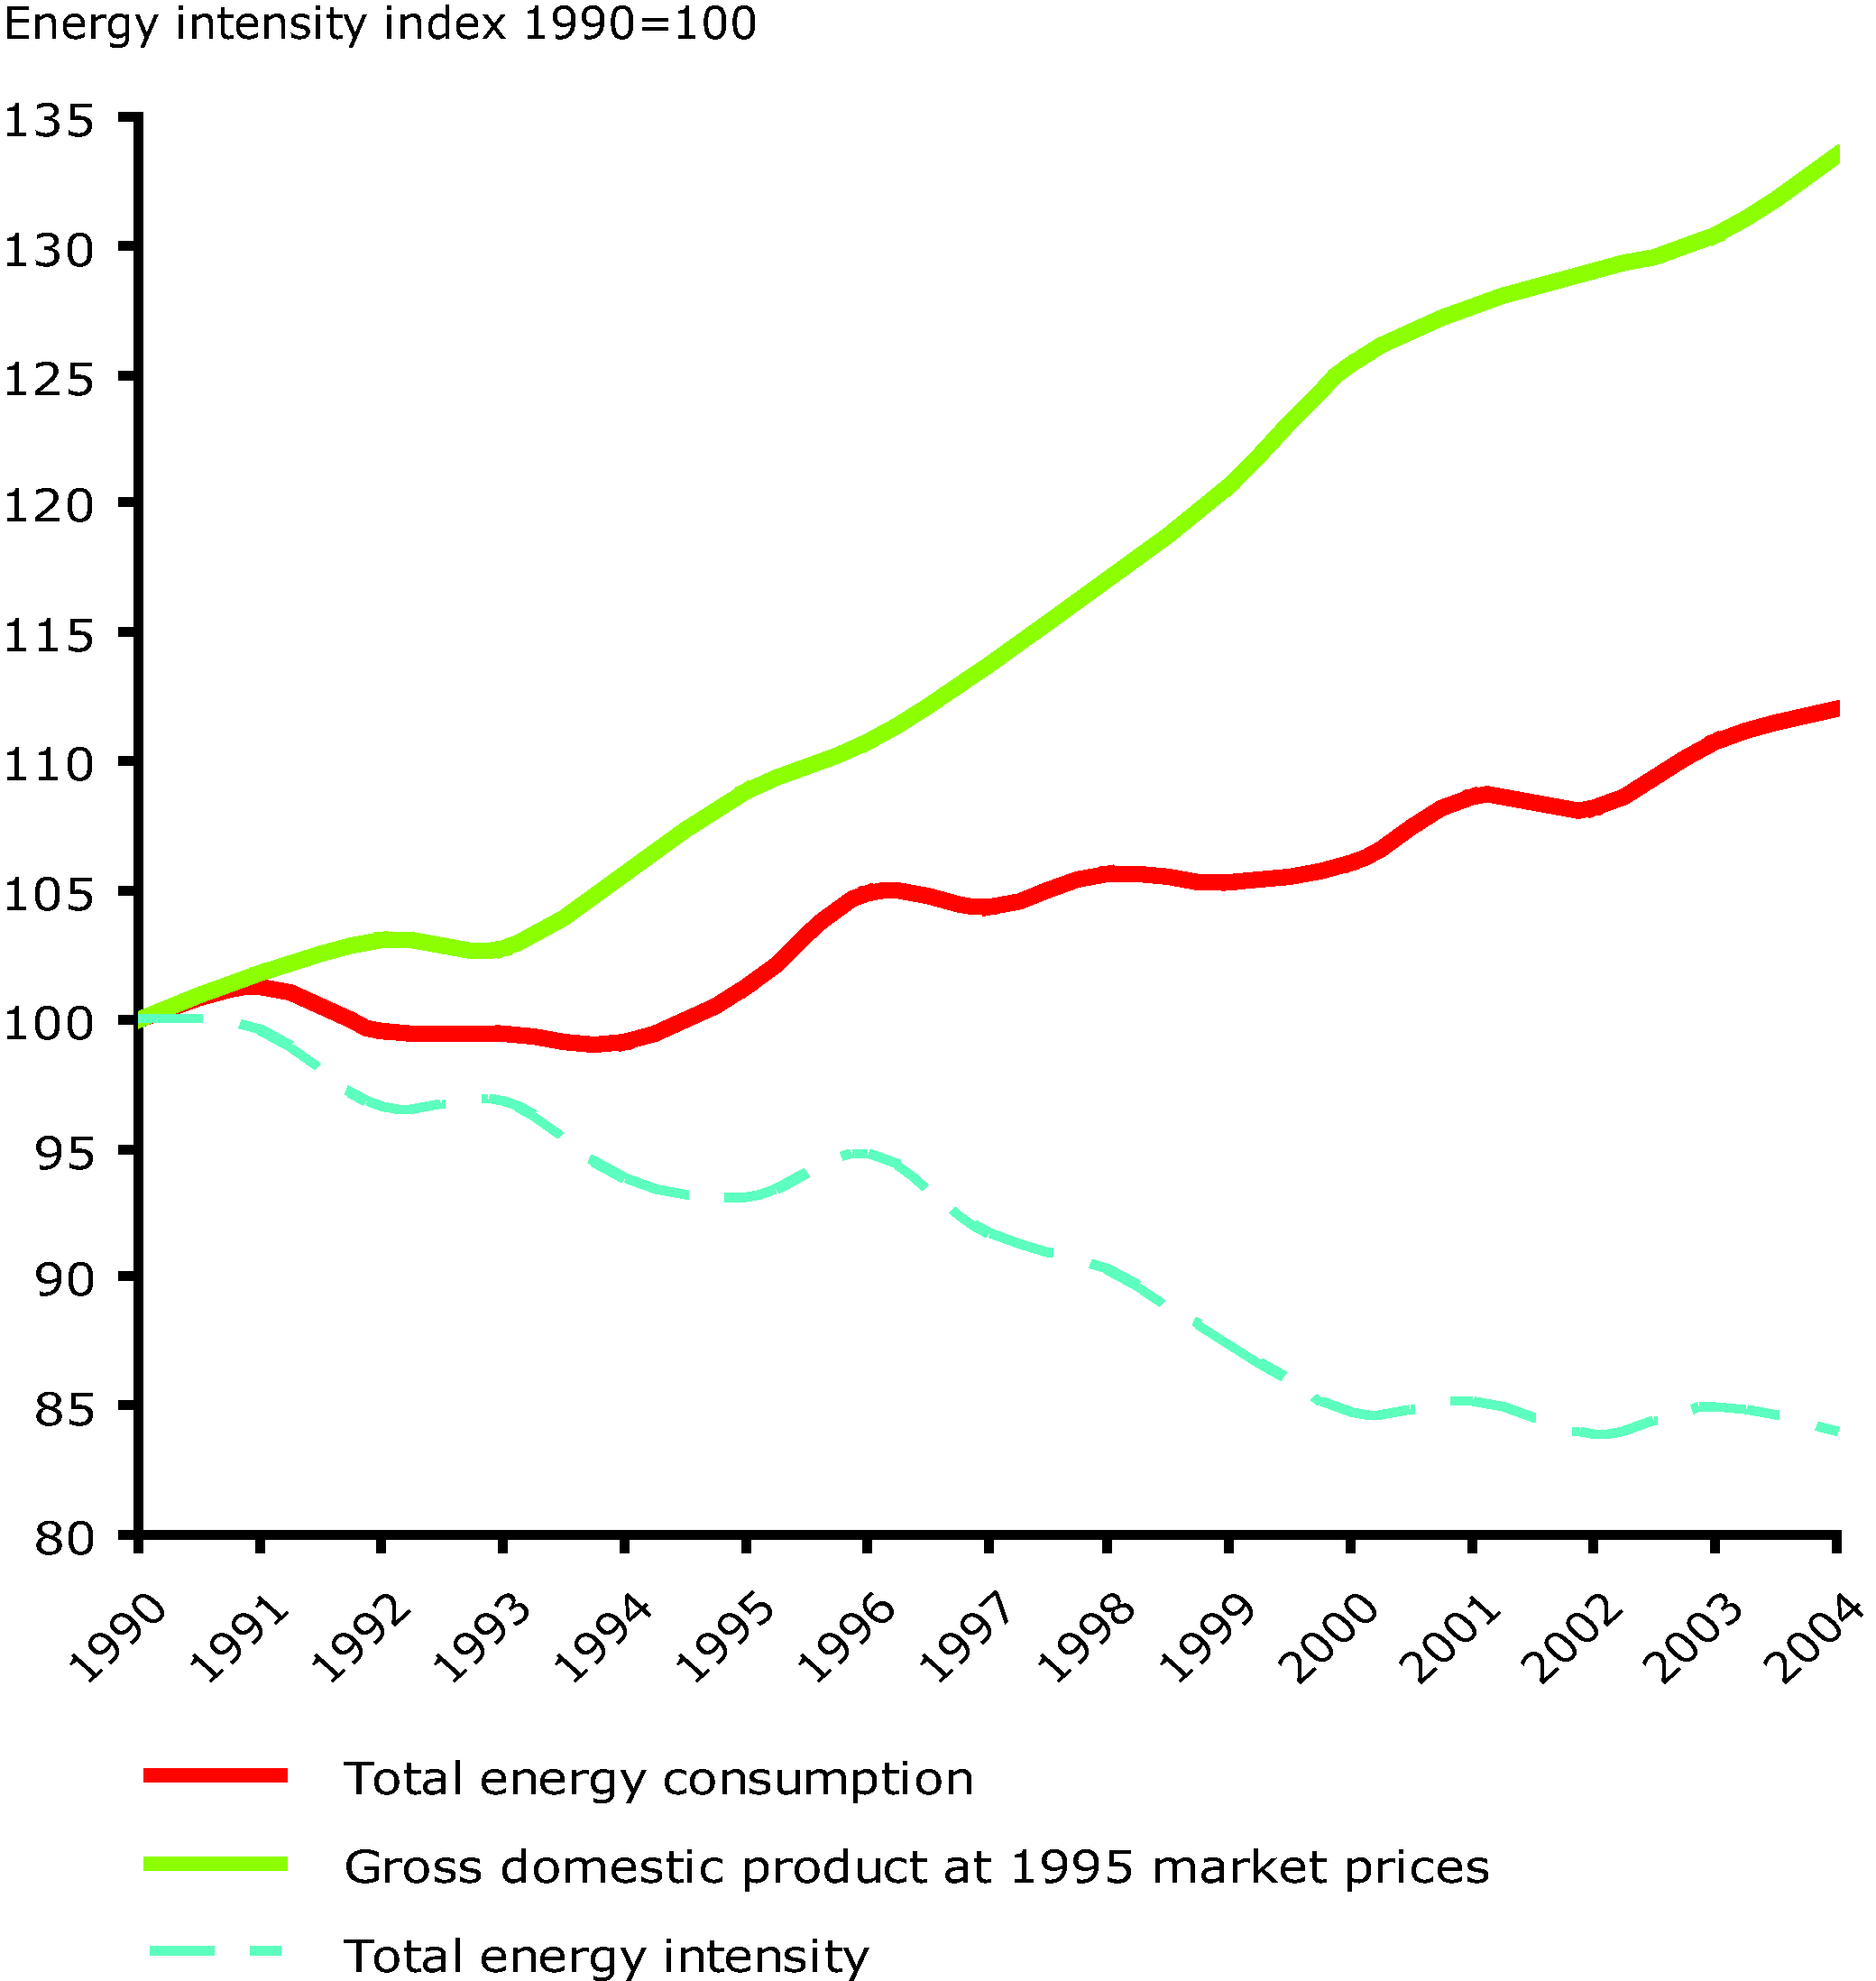 Total energy intensity in the EU-25 during 1990-2004, 1990=100